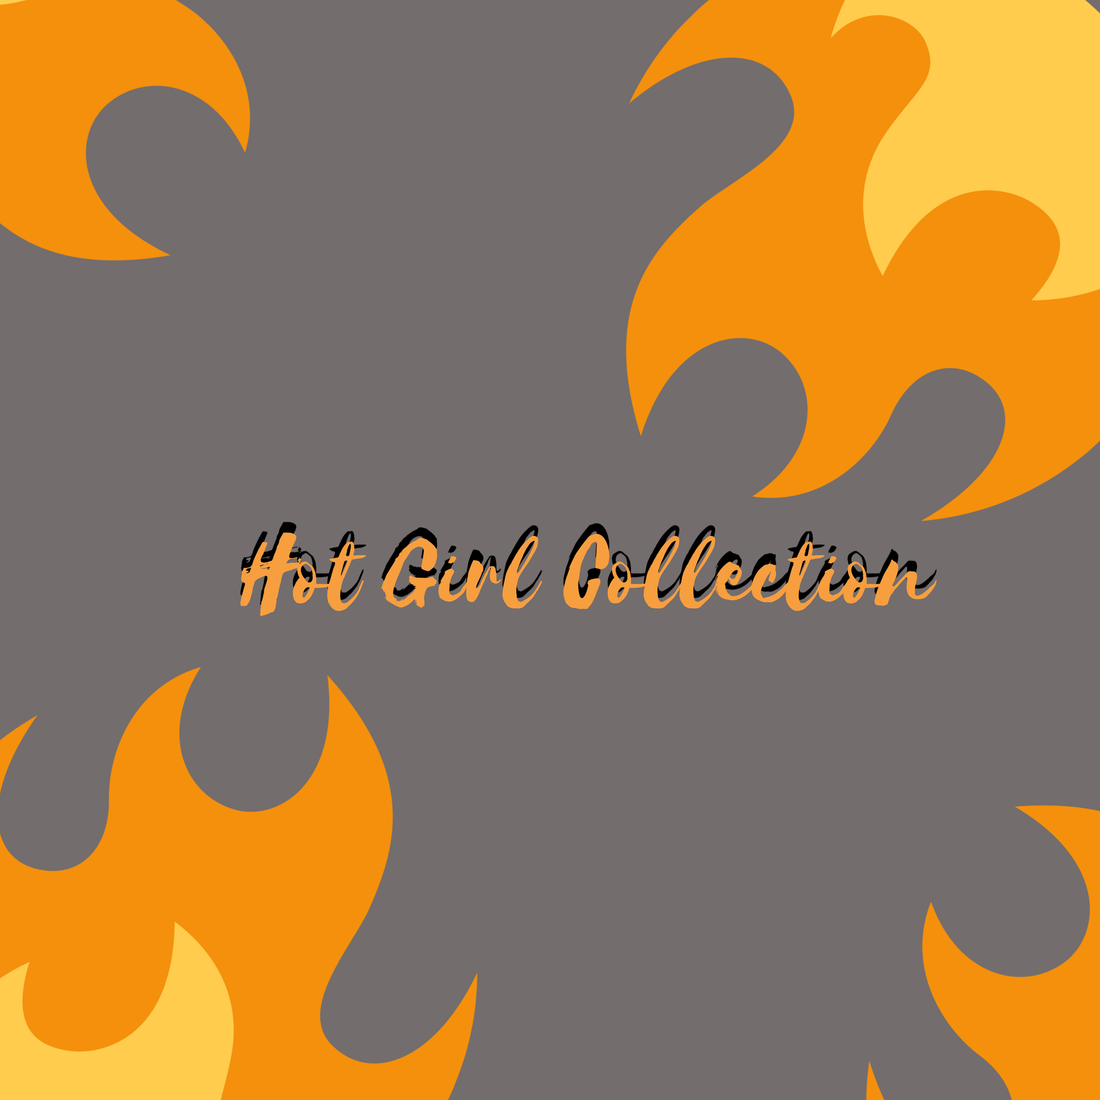  HOT GIRL COLLECTION